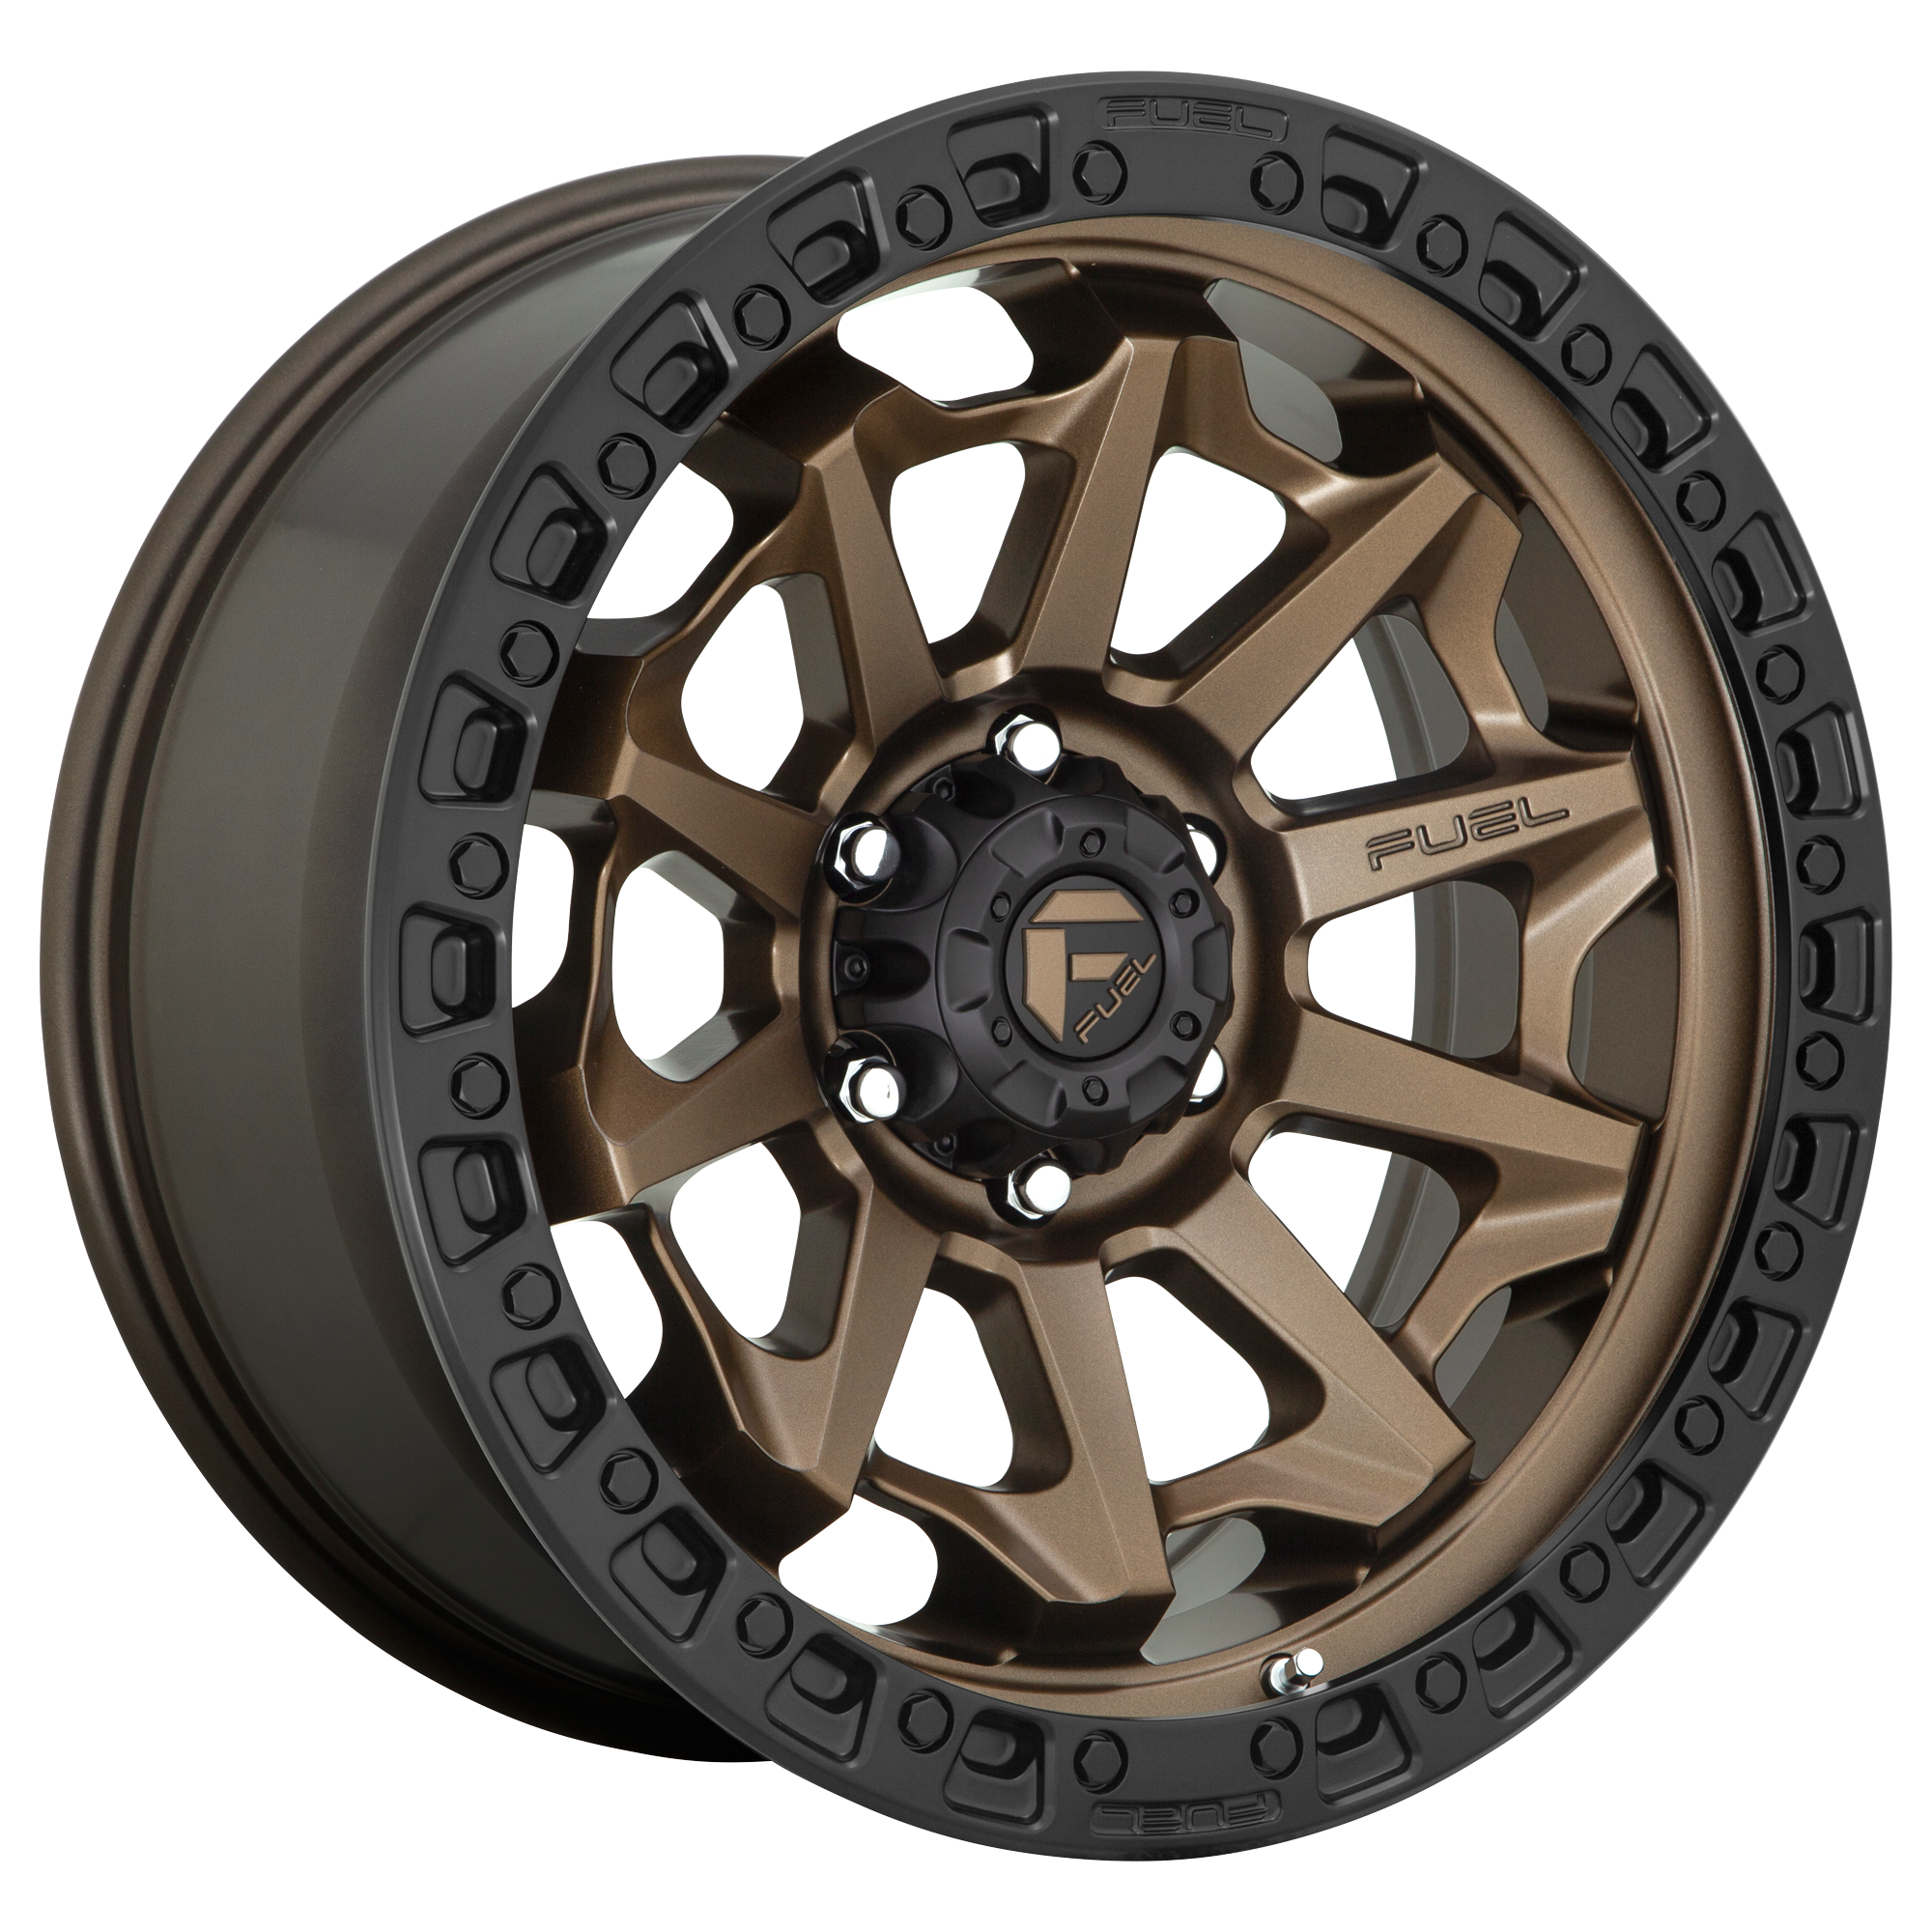 COVERT 18x9 6x139.70 MATTE BRONZE BLACK BEAD RING (20 mm) - Tires and Engine Performance